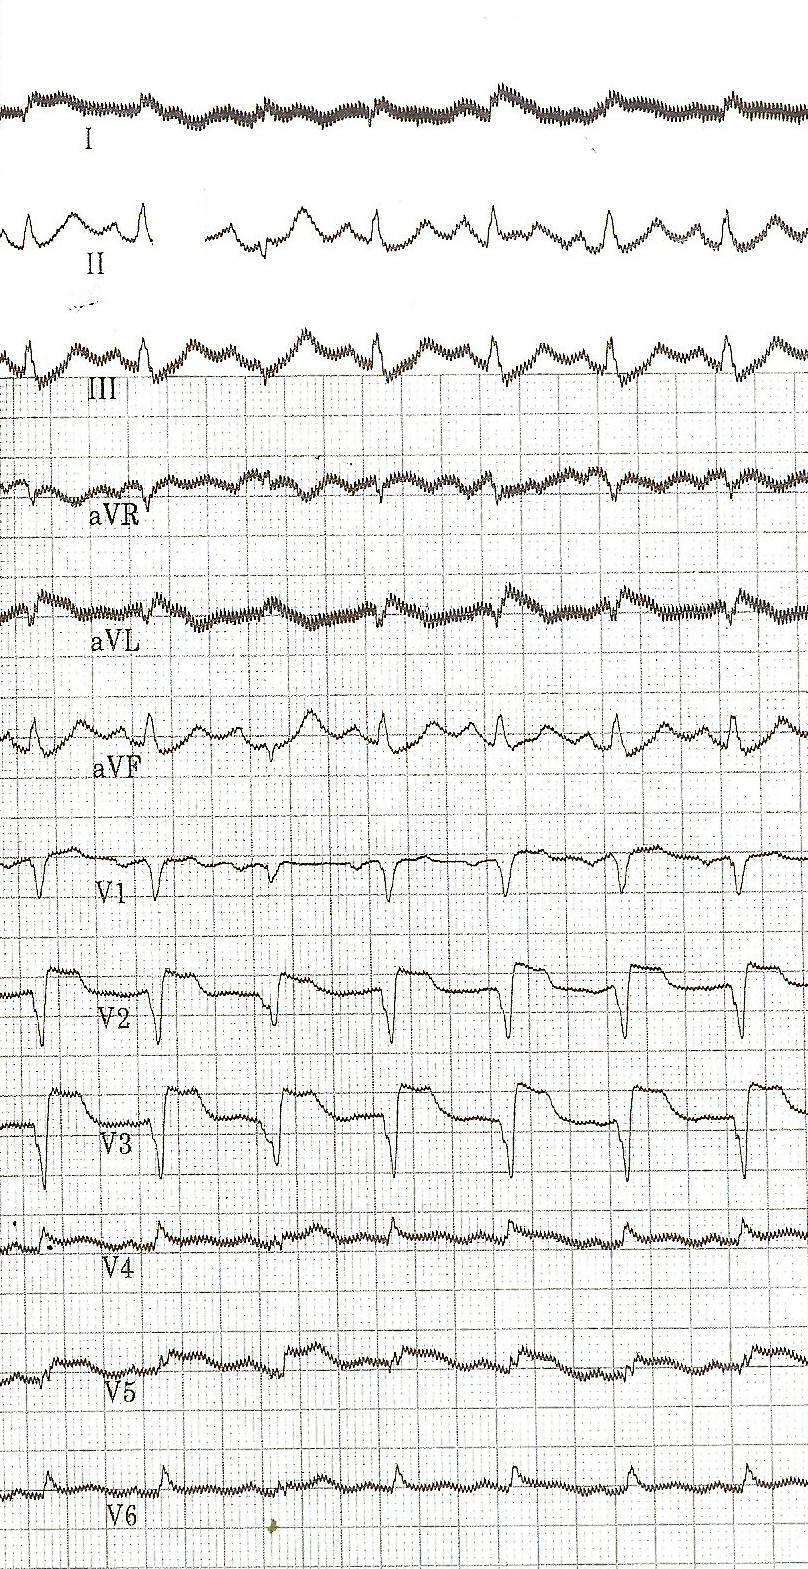 ECG on admission: A large anterior wall infarction